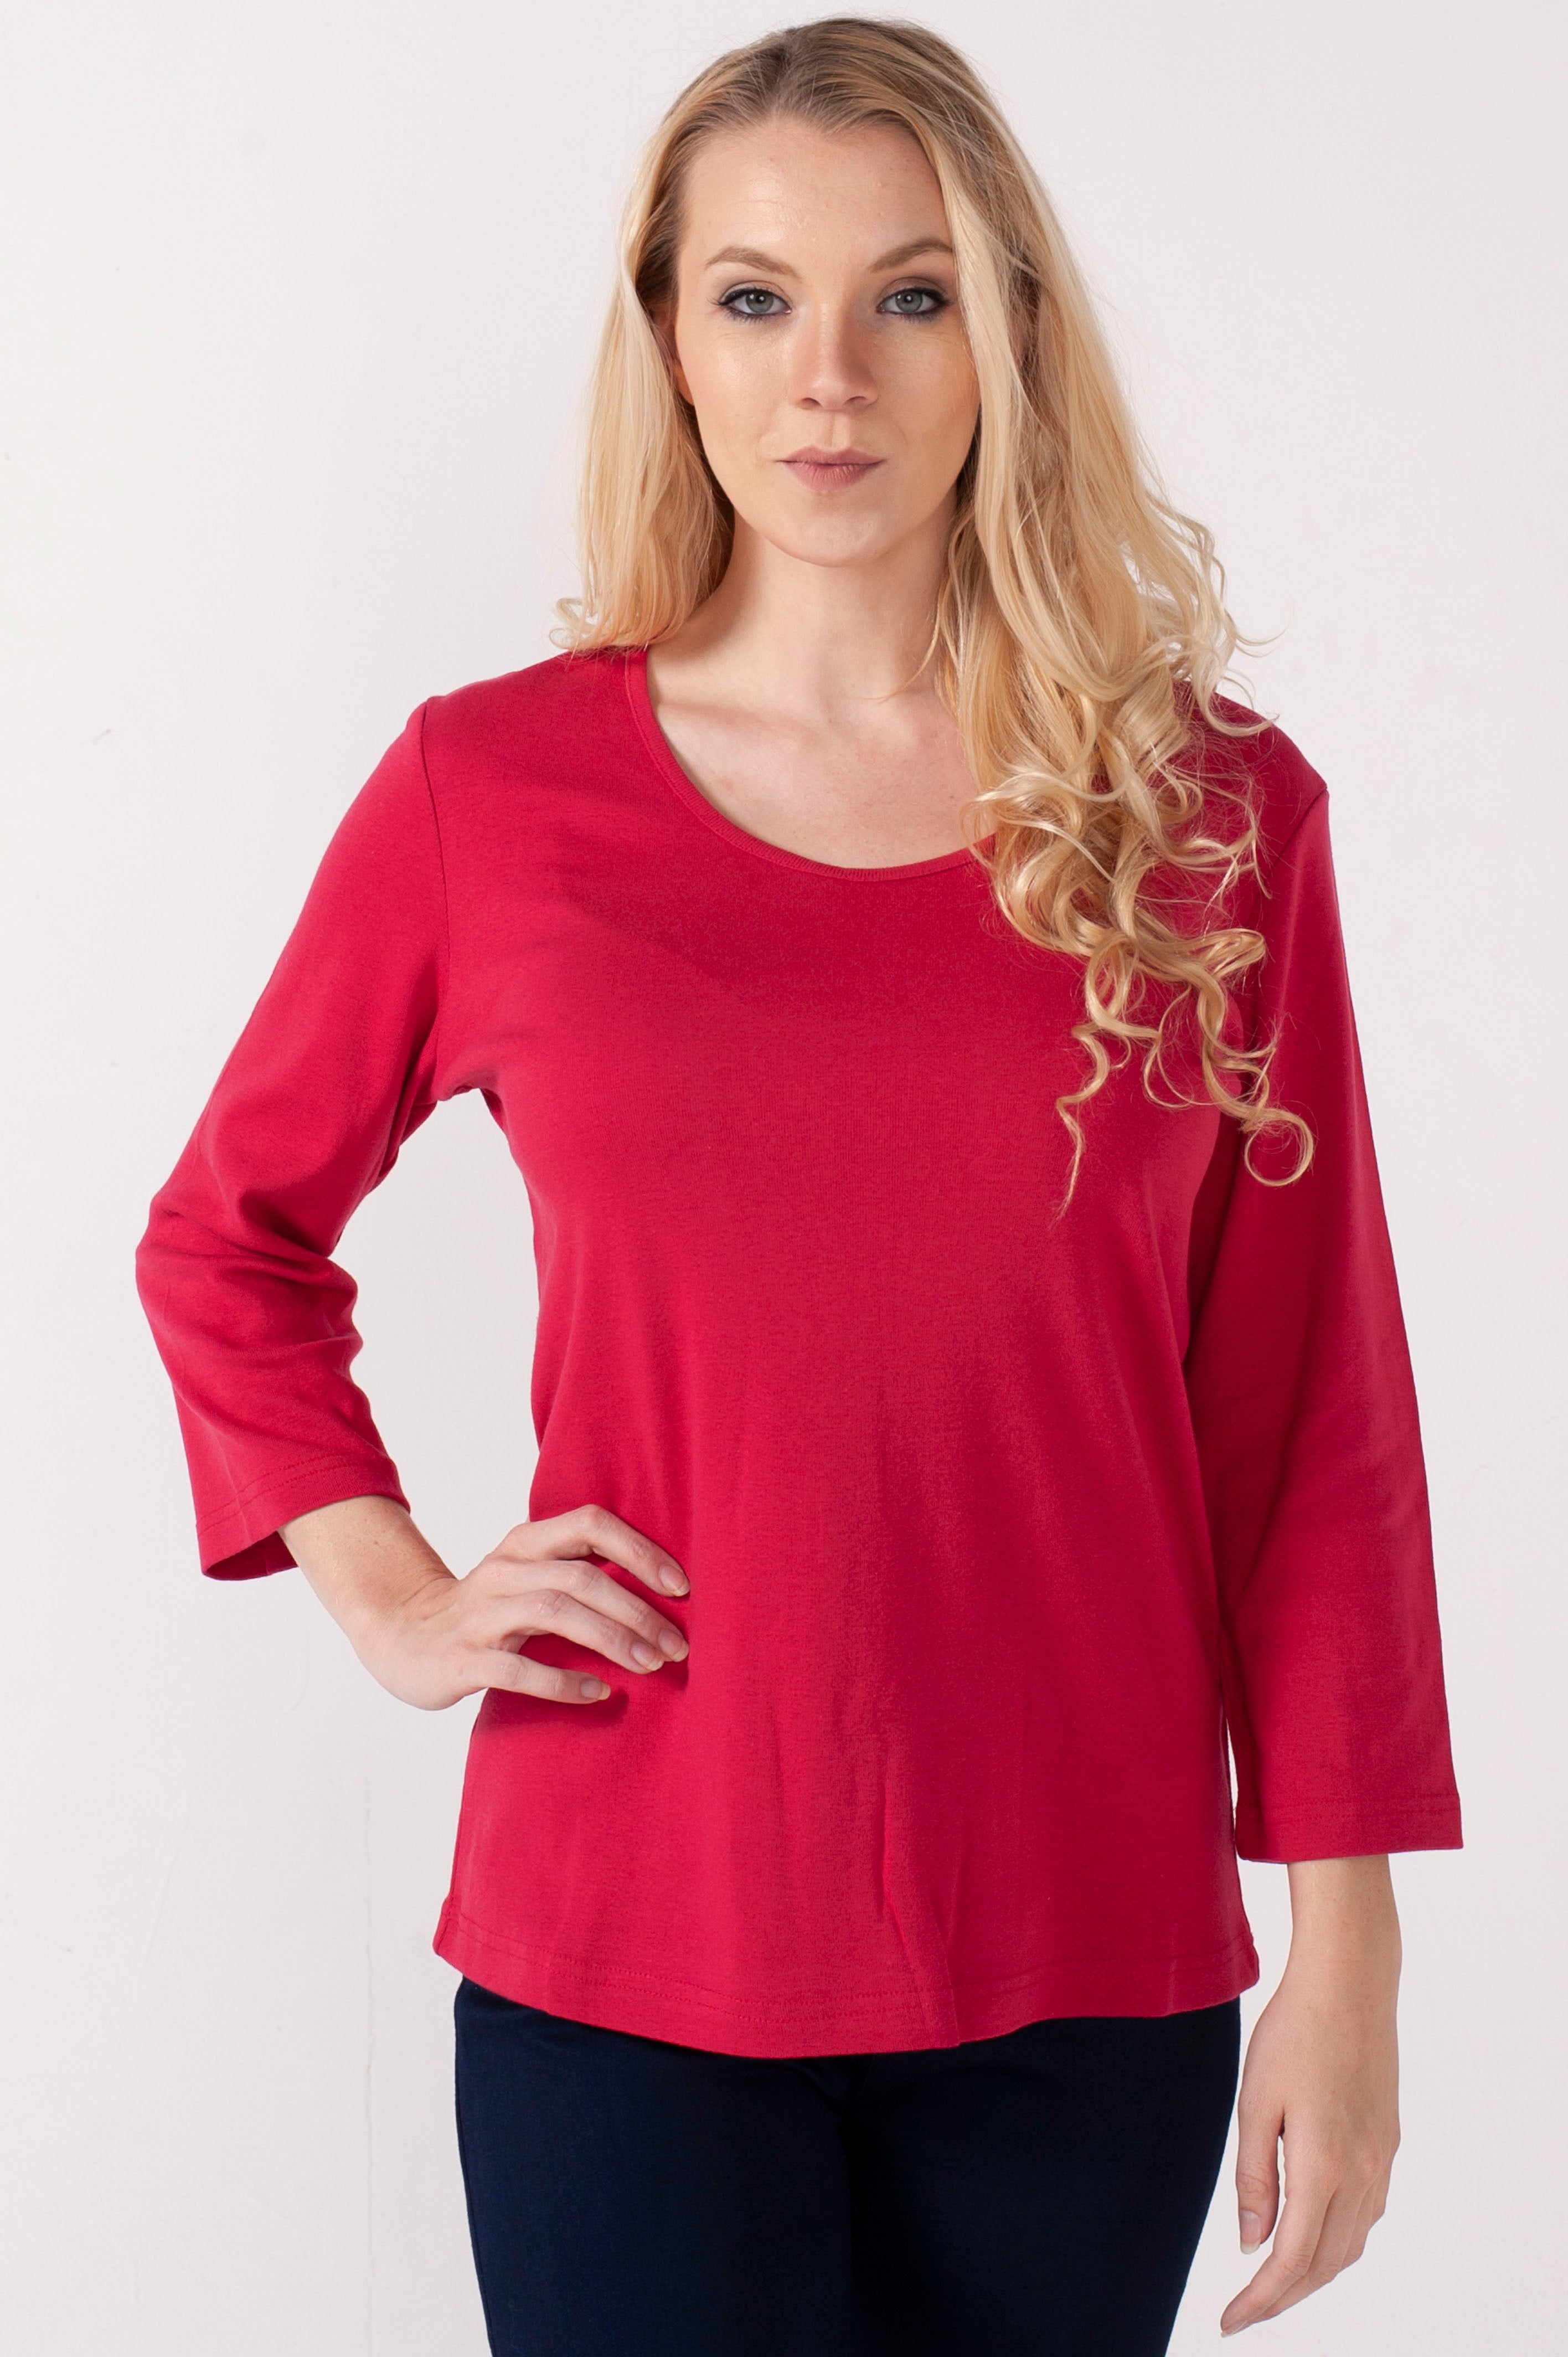 Solid 3/4 Sleeves Red Top